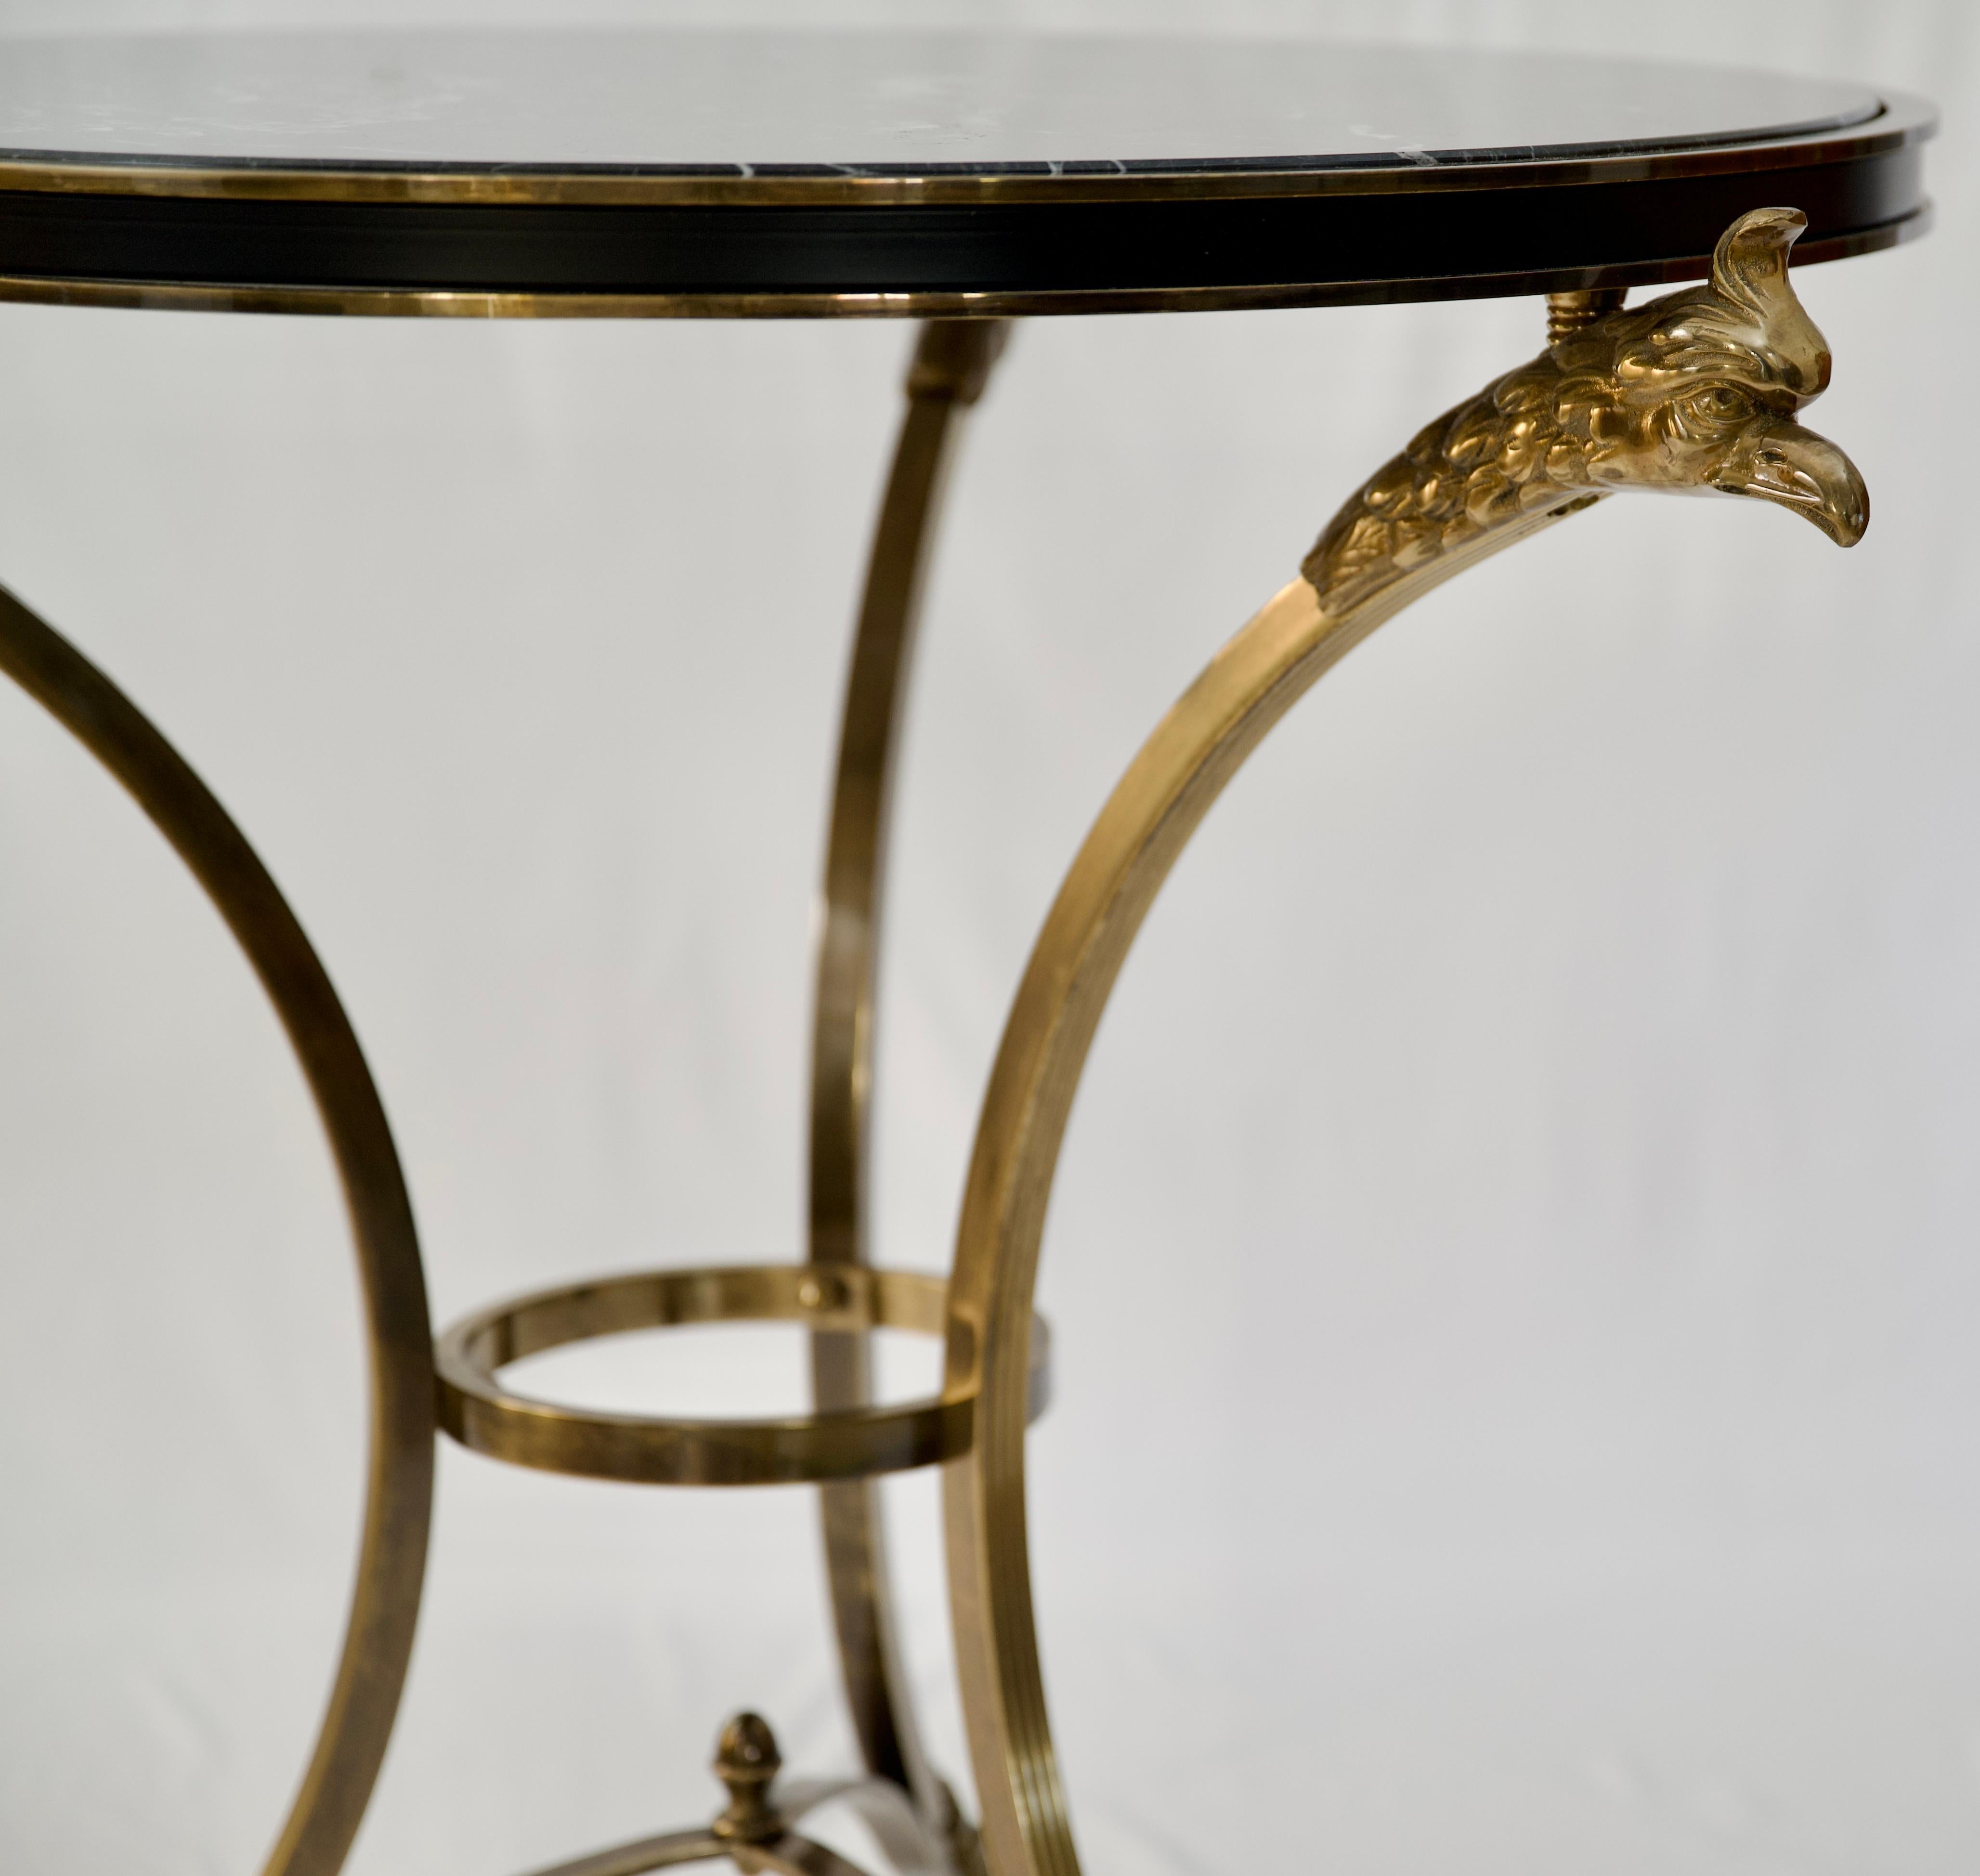 Neoclassical Alberto Orlandi Pair of Gueridon Tables or Black Marble Top Side Tables 